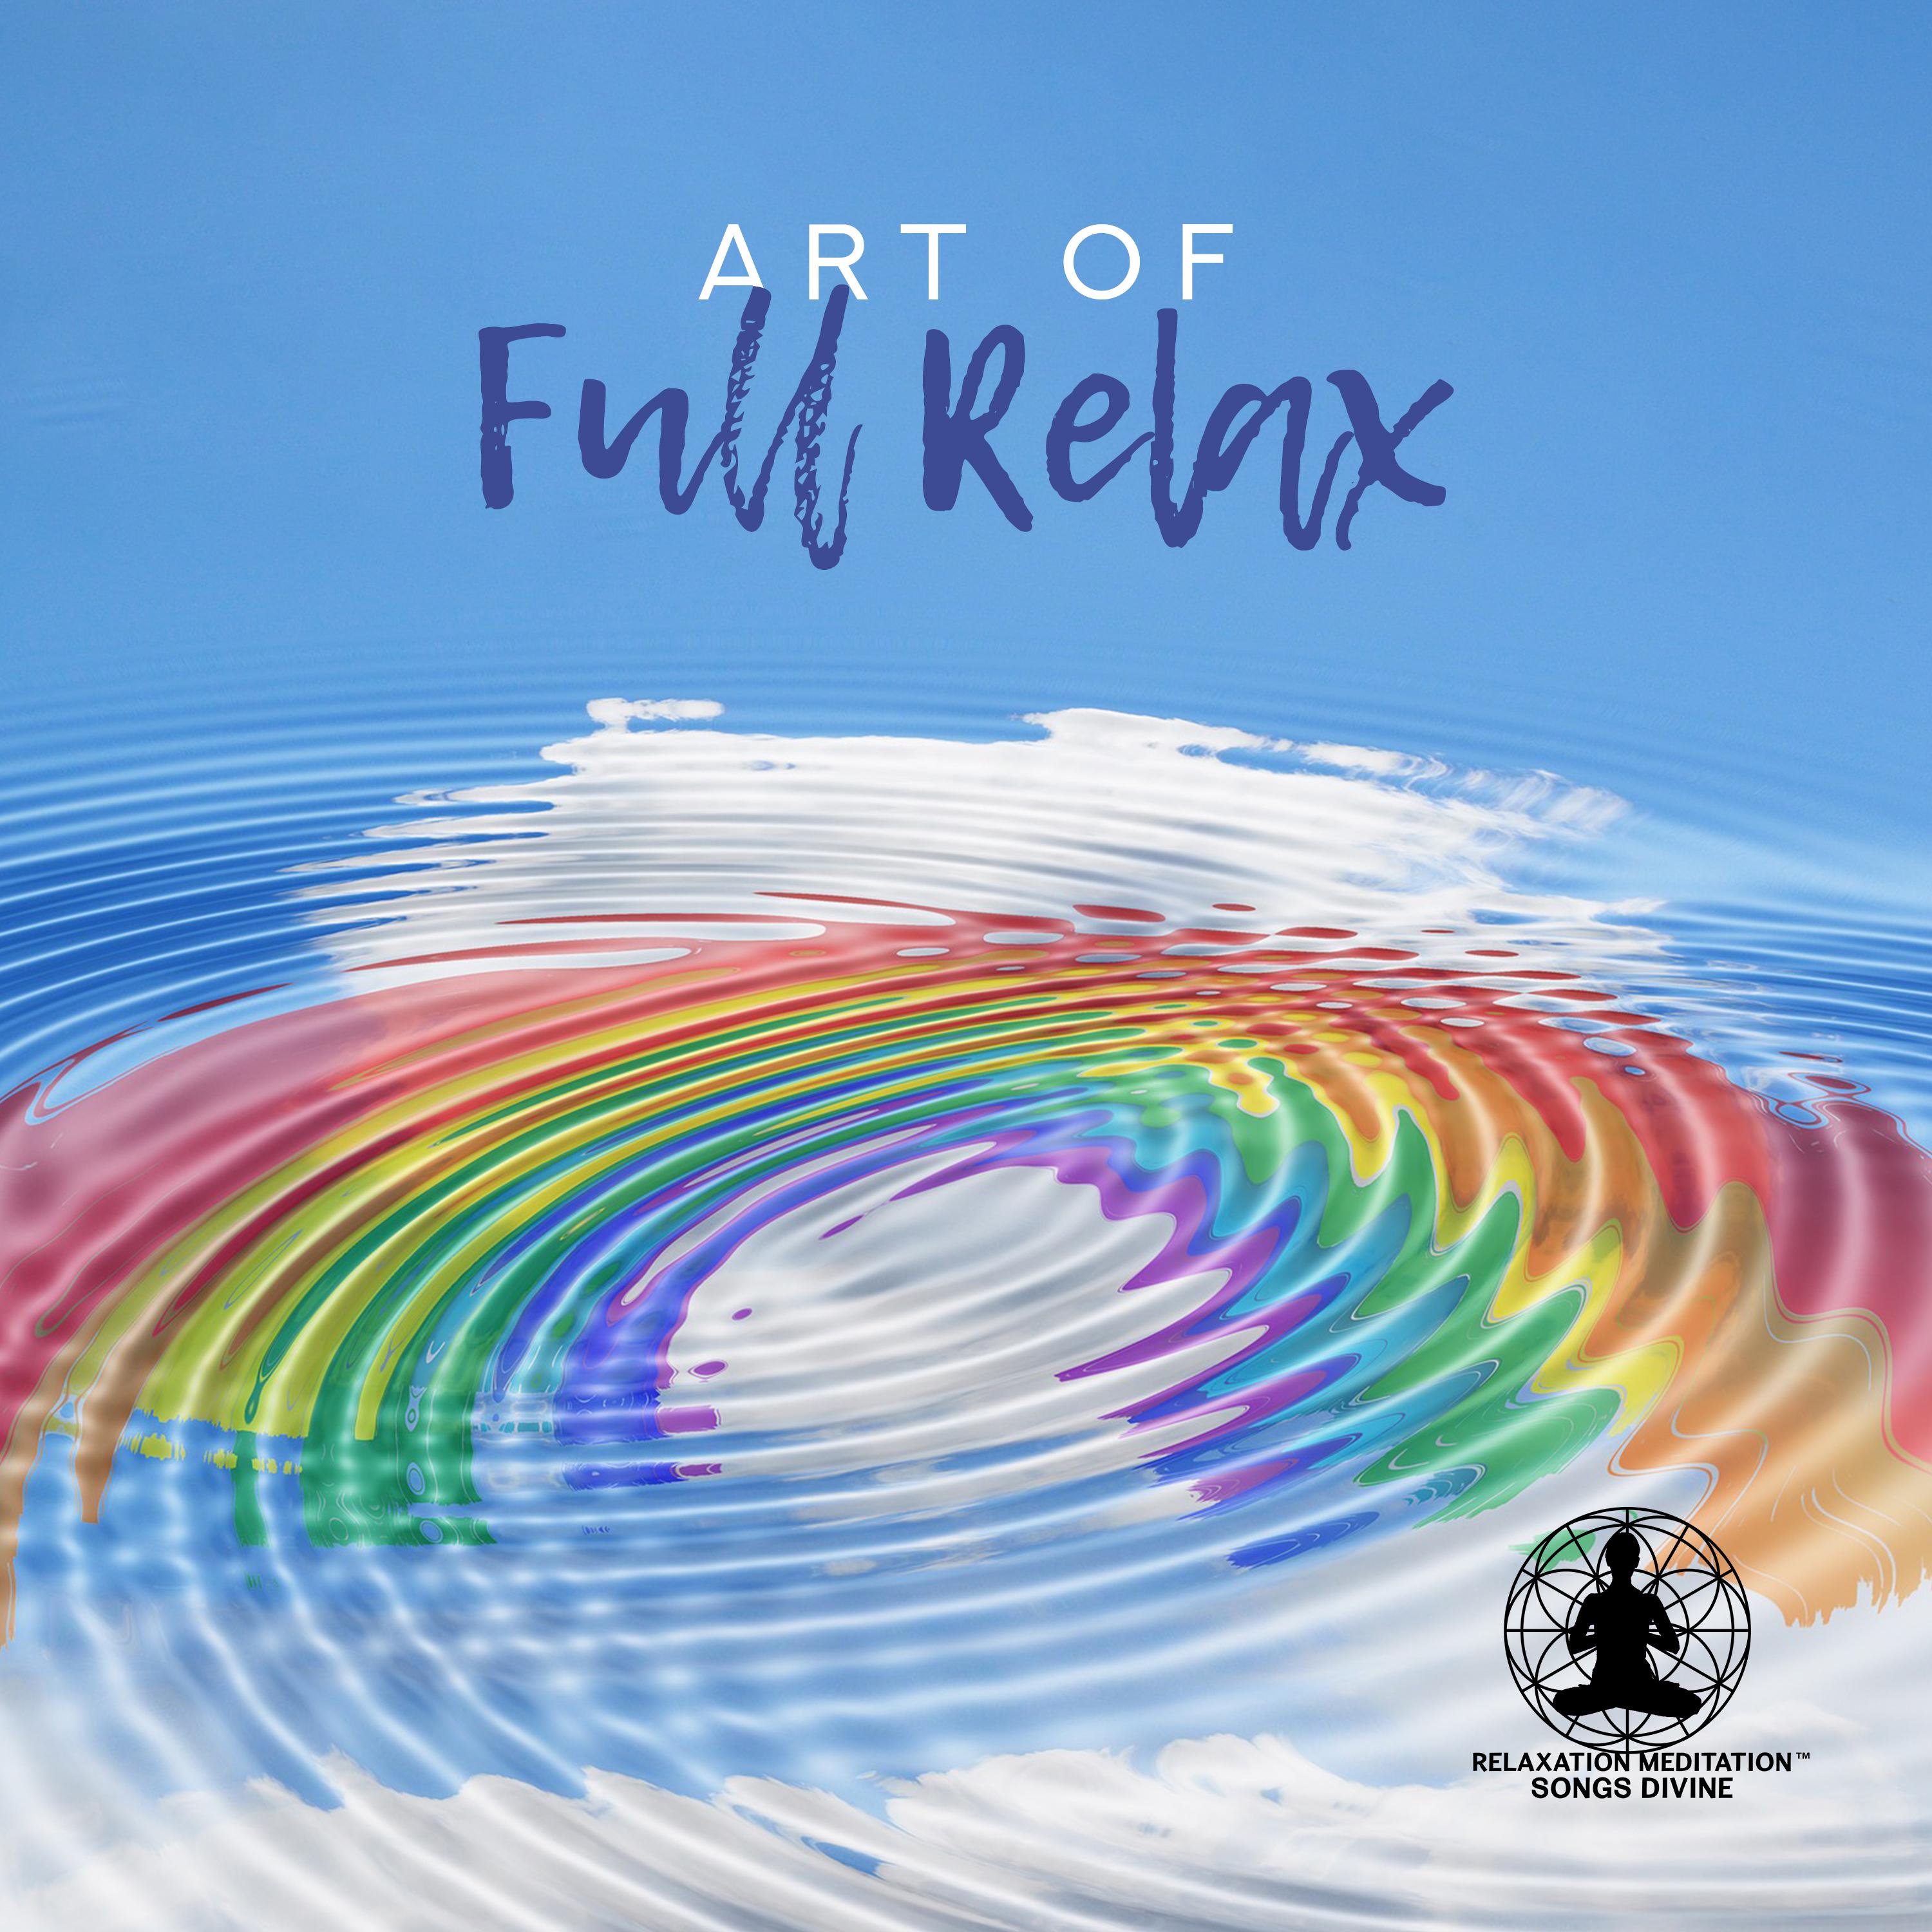 Art of Full Relax (Stream of Calm, Shades of Blue, Peace Vibrations, Safe Serene Sounds)